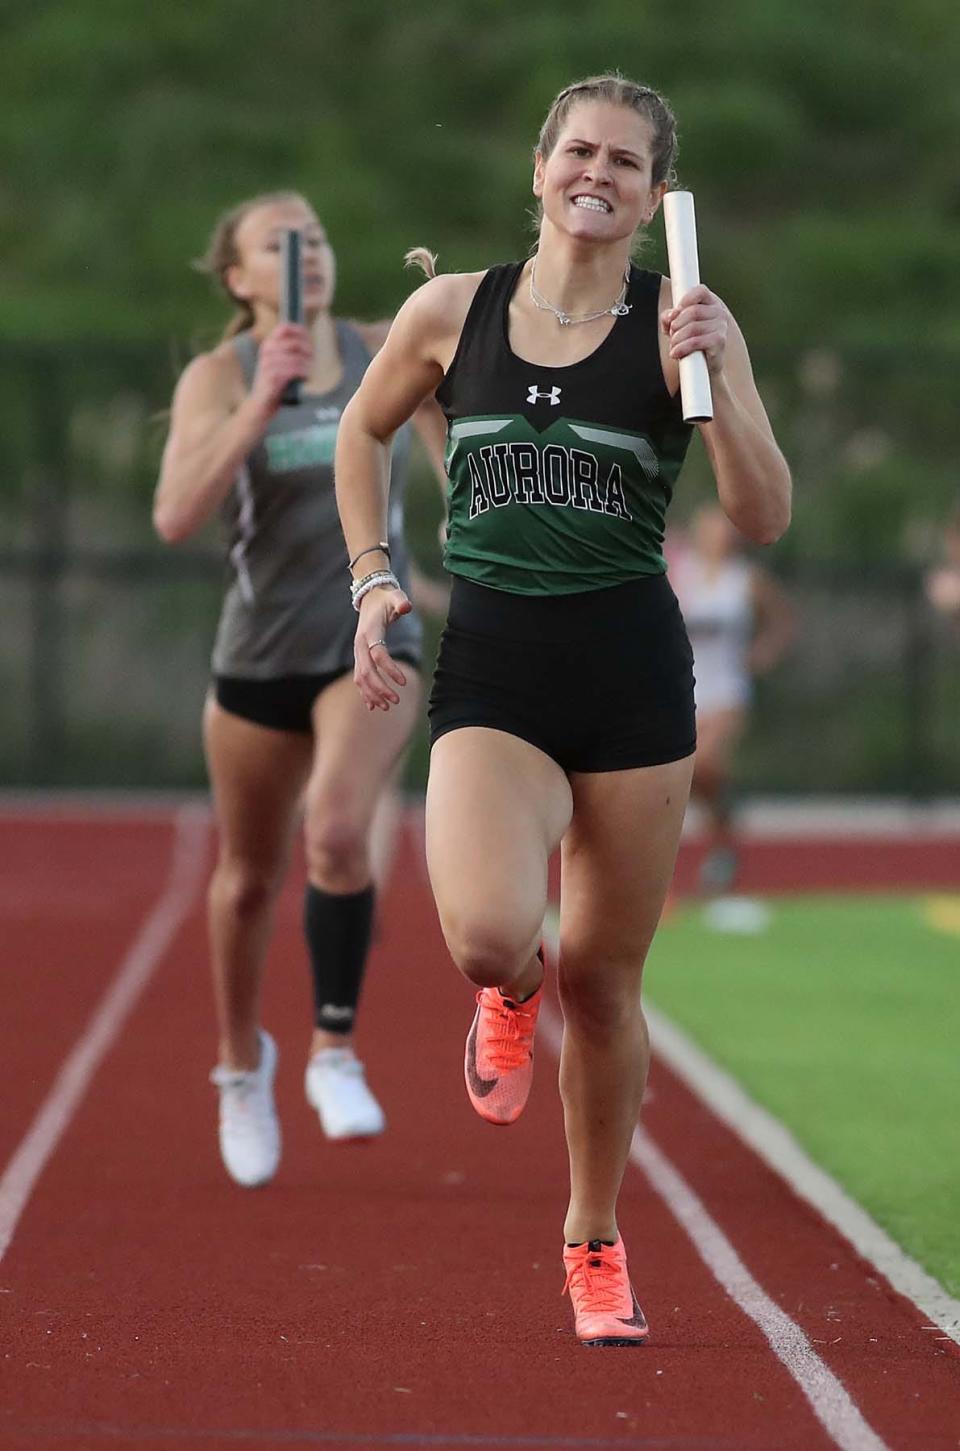 Lauren Tincher of Aurora anchors the team of Grace Barto, Alyssa Marotta and Hannah Rogge to a first place finish with a time of 4:08.56 in the 4 x 400 meter relay to clinch team victory for Aurora during the Suburban League American Conference Meet at Tallmadge High School in Tallmadge on Tuesday. 